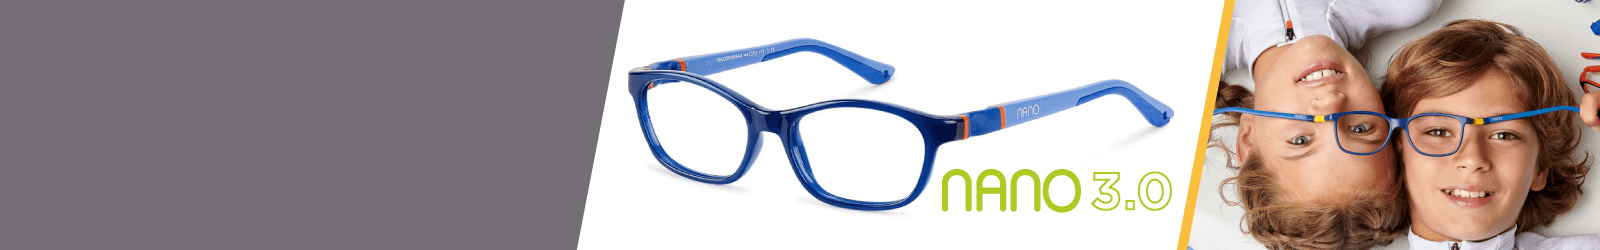 Aqua Nano 3.0 Indestructible Kids Glasses from 6 to 8-year-old